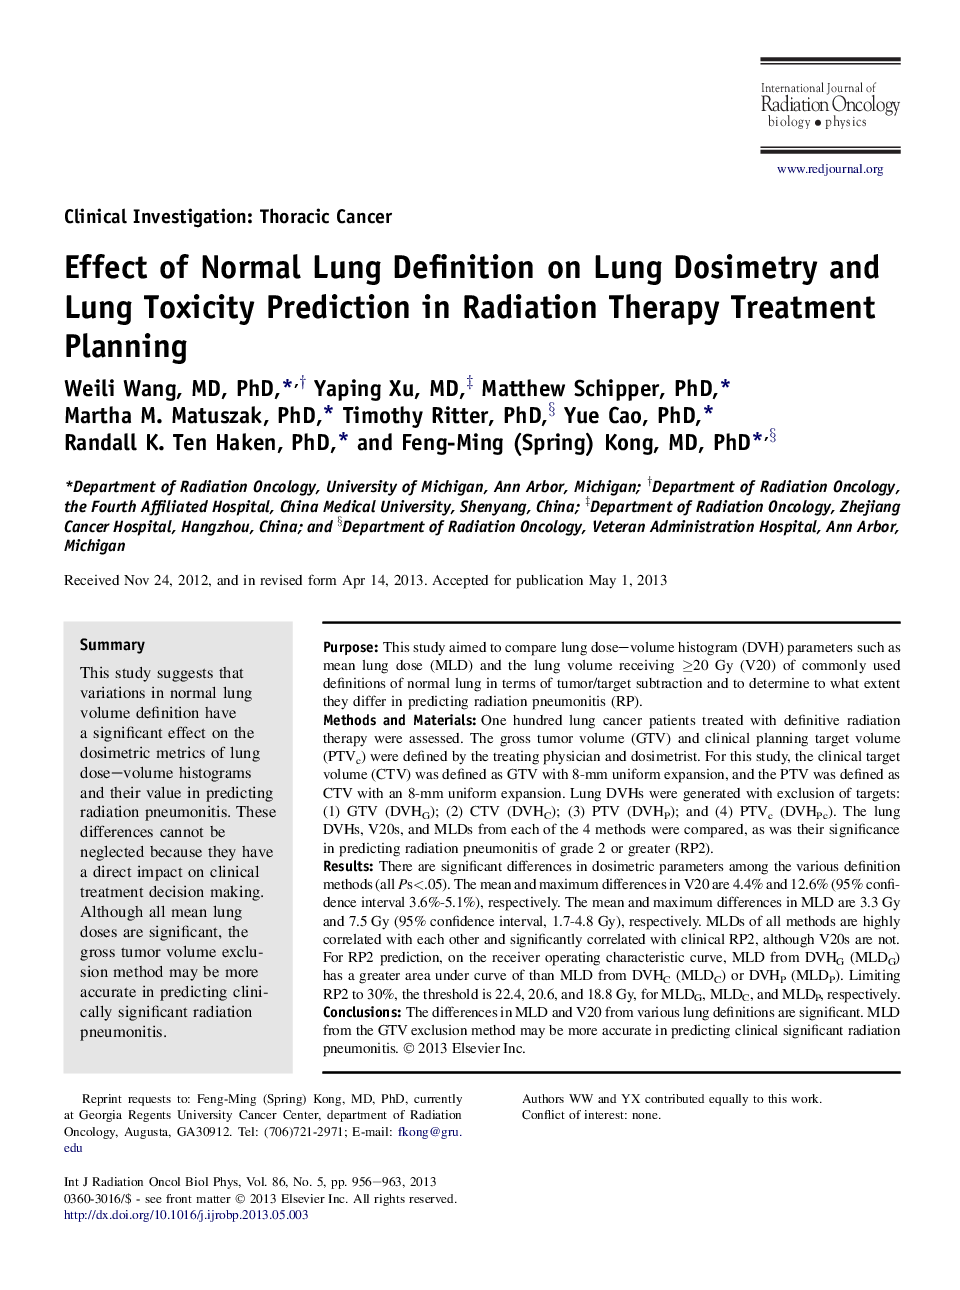 Effect of Normal Lung Definition on Lung Dosimetry and Lung Toxicity Prediction in Radiation Therapy Treatment Planning